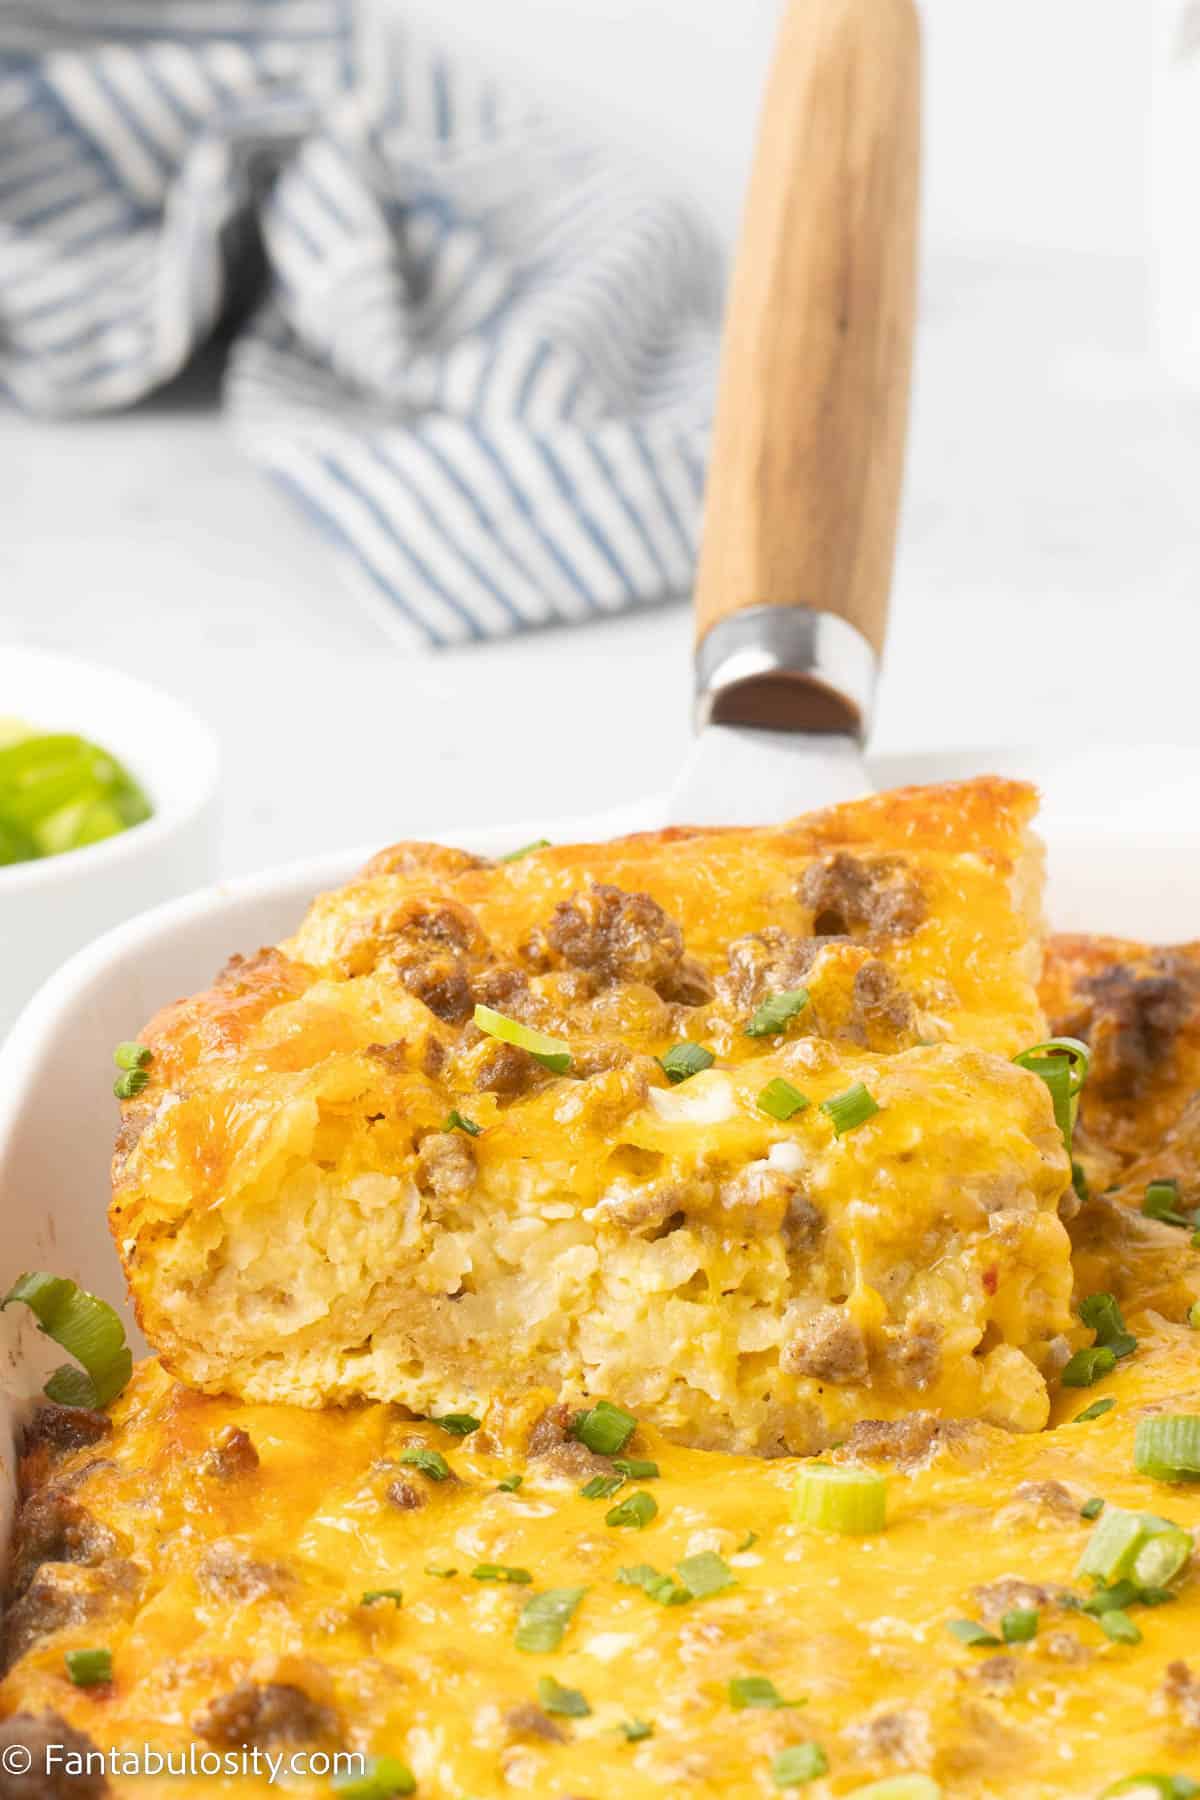 Sausage and Egg Casserole being lifted out of baking dish